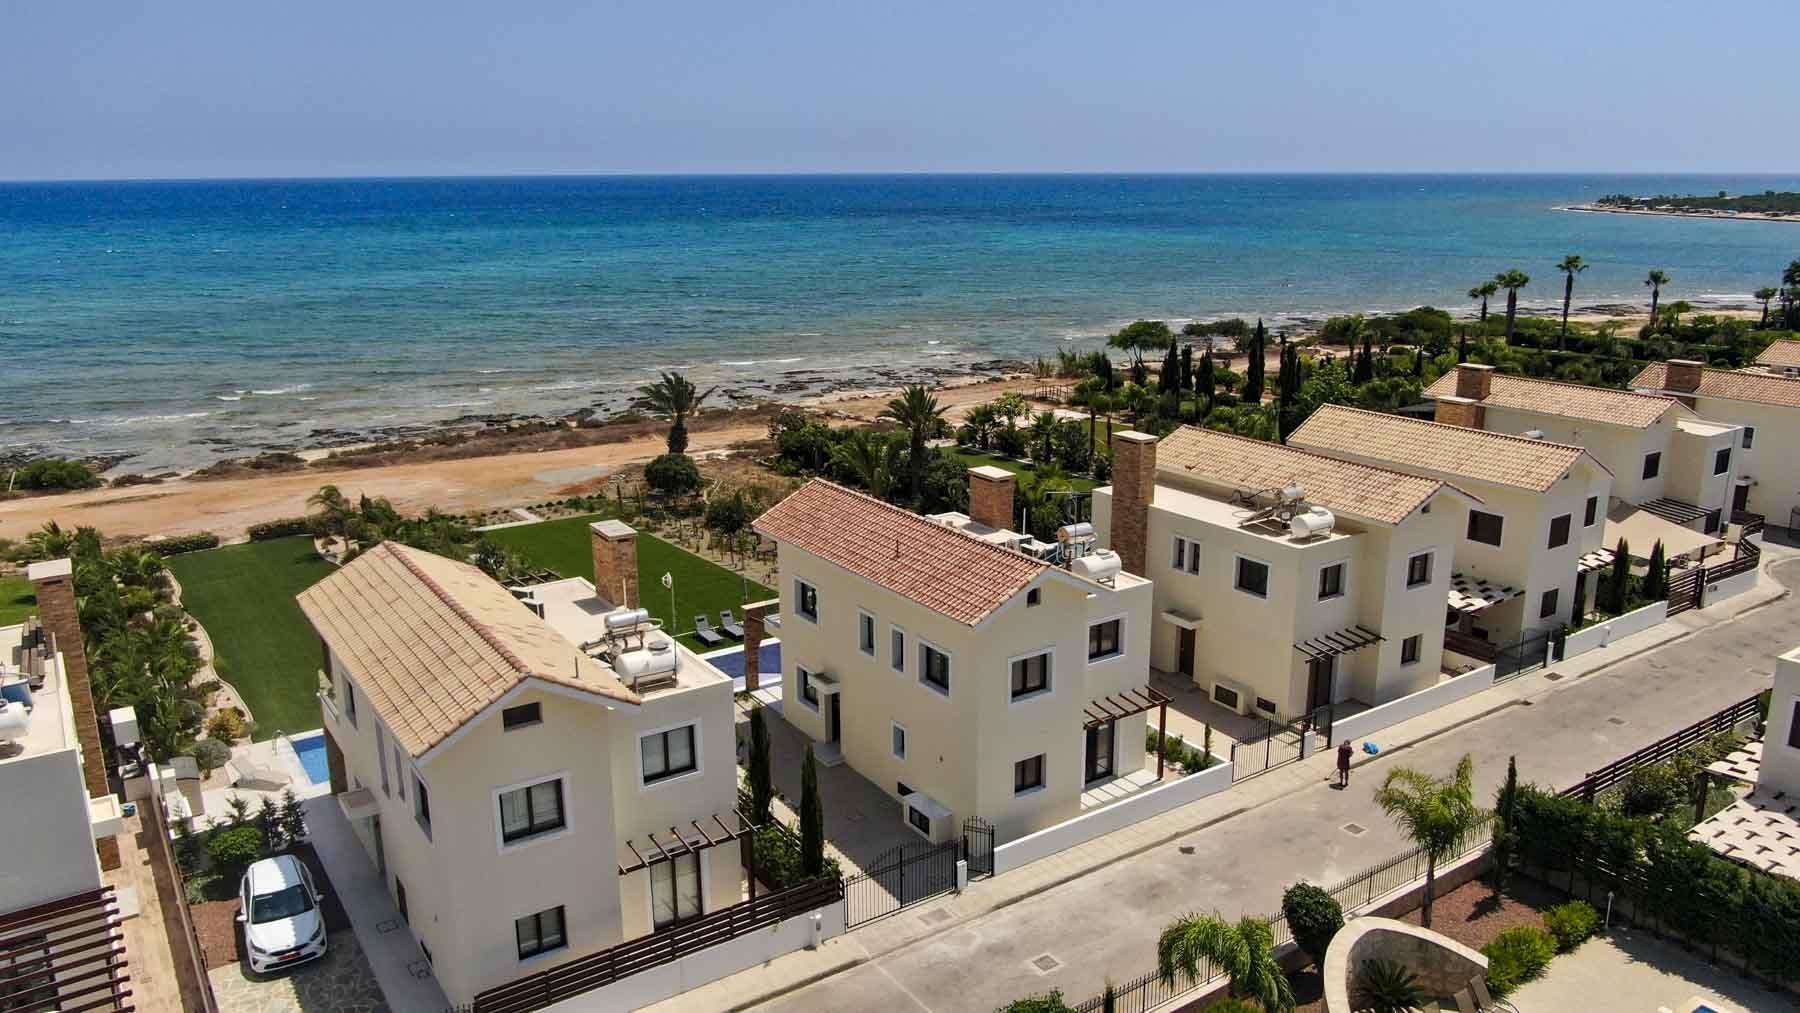 5 Bedroom House for Sale in Agia Thekla, Famagusta District